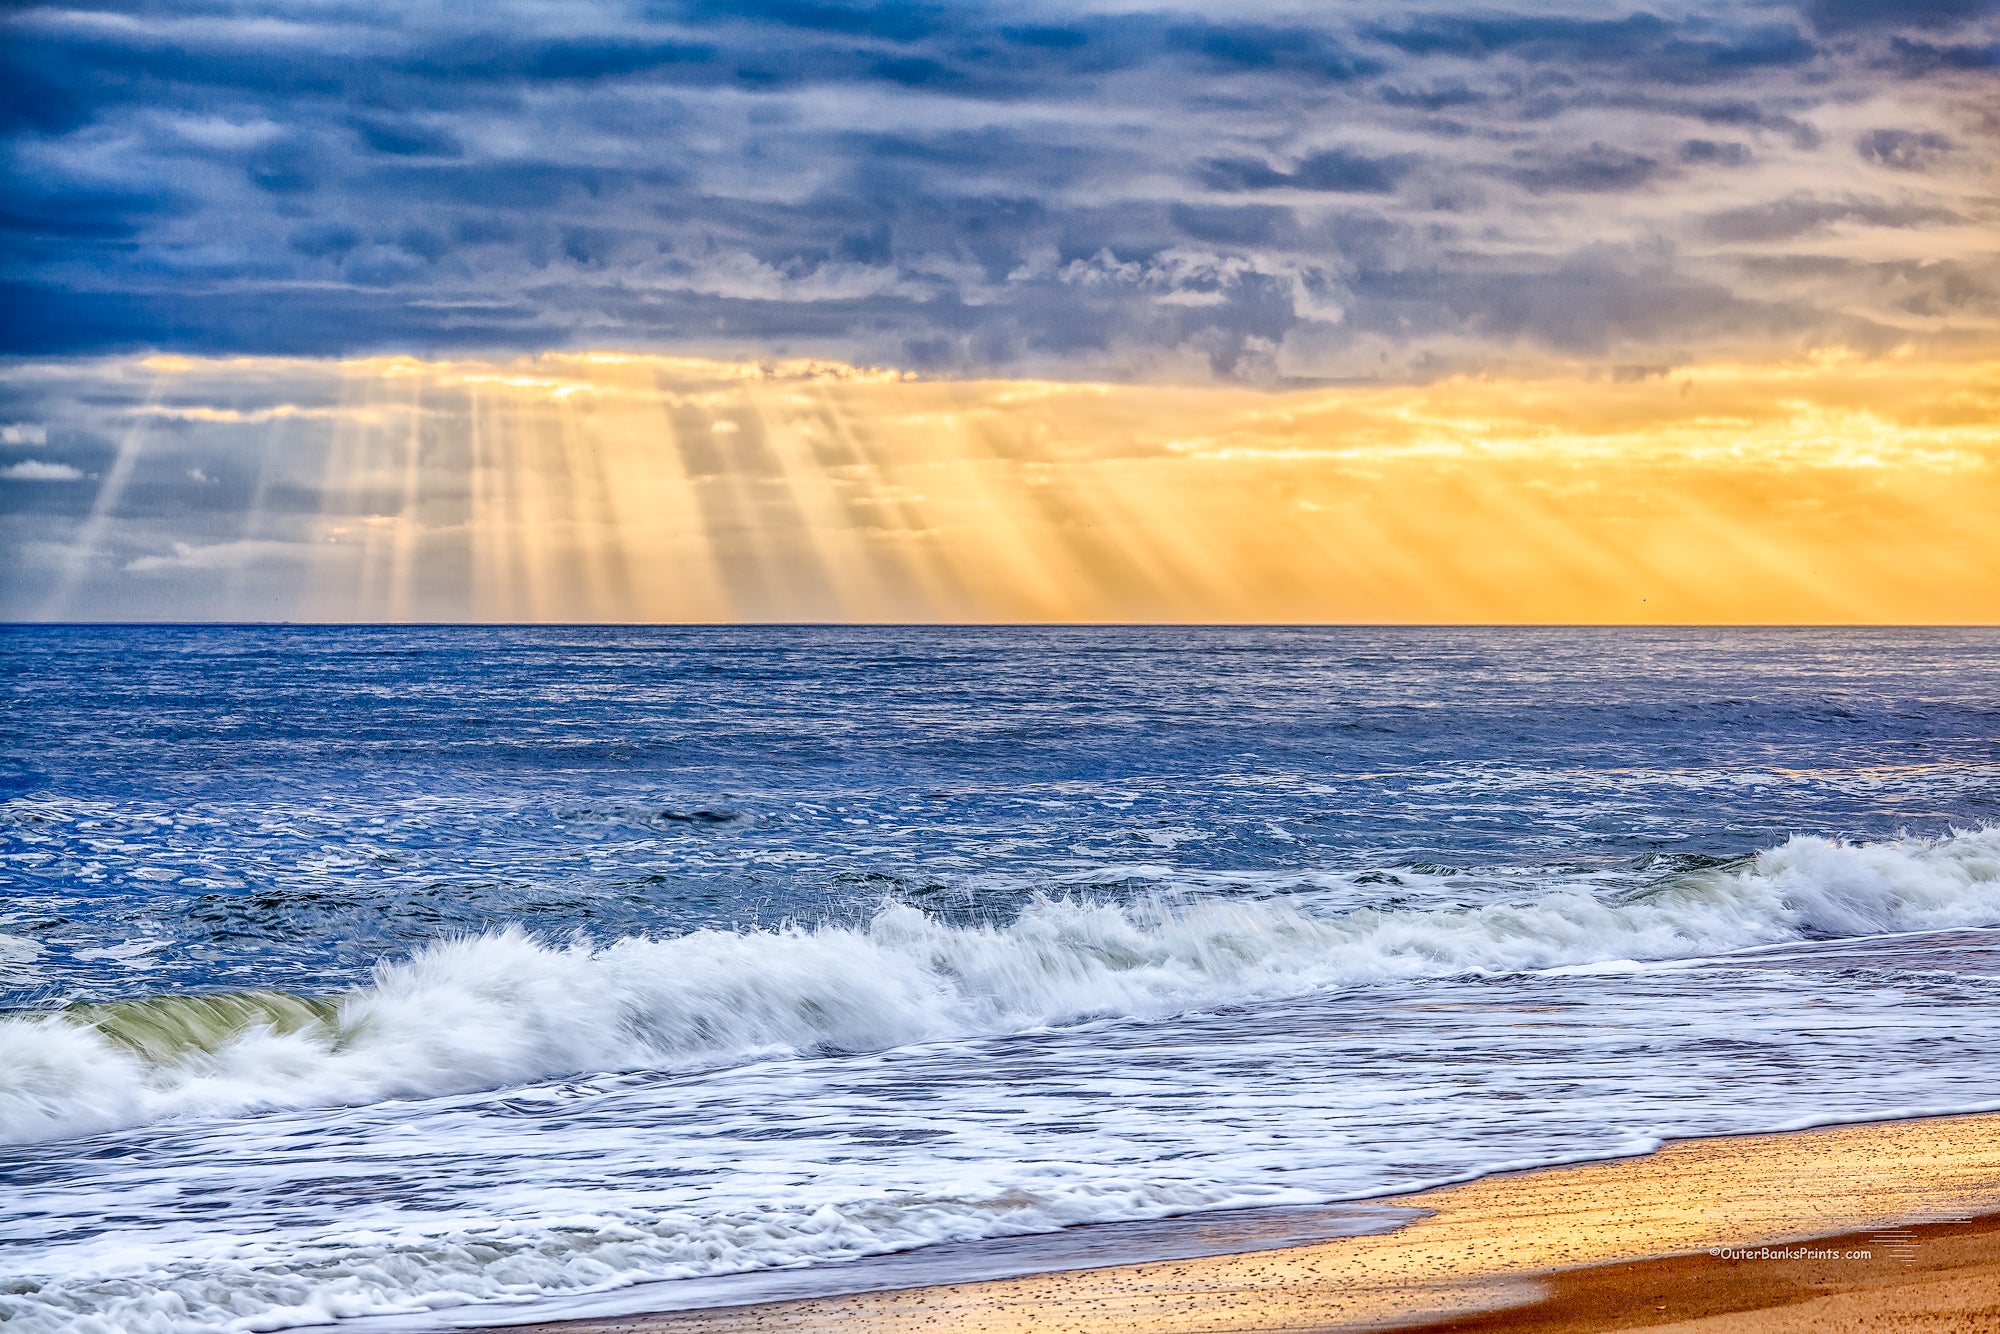 Sun rays breaking through a stormy sky over the beach on the Outer Banks.